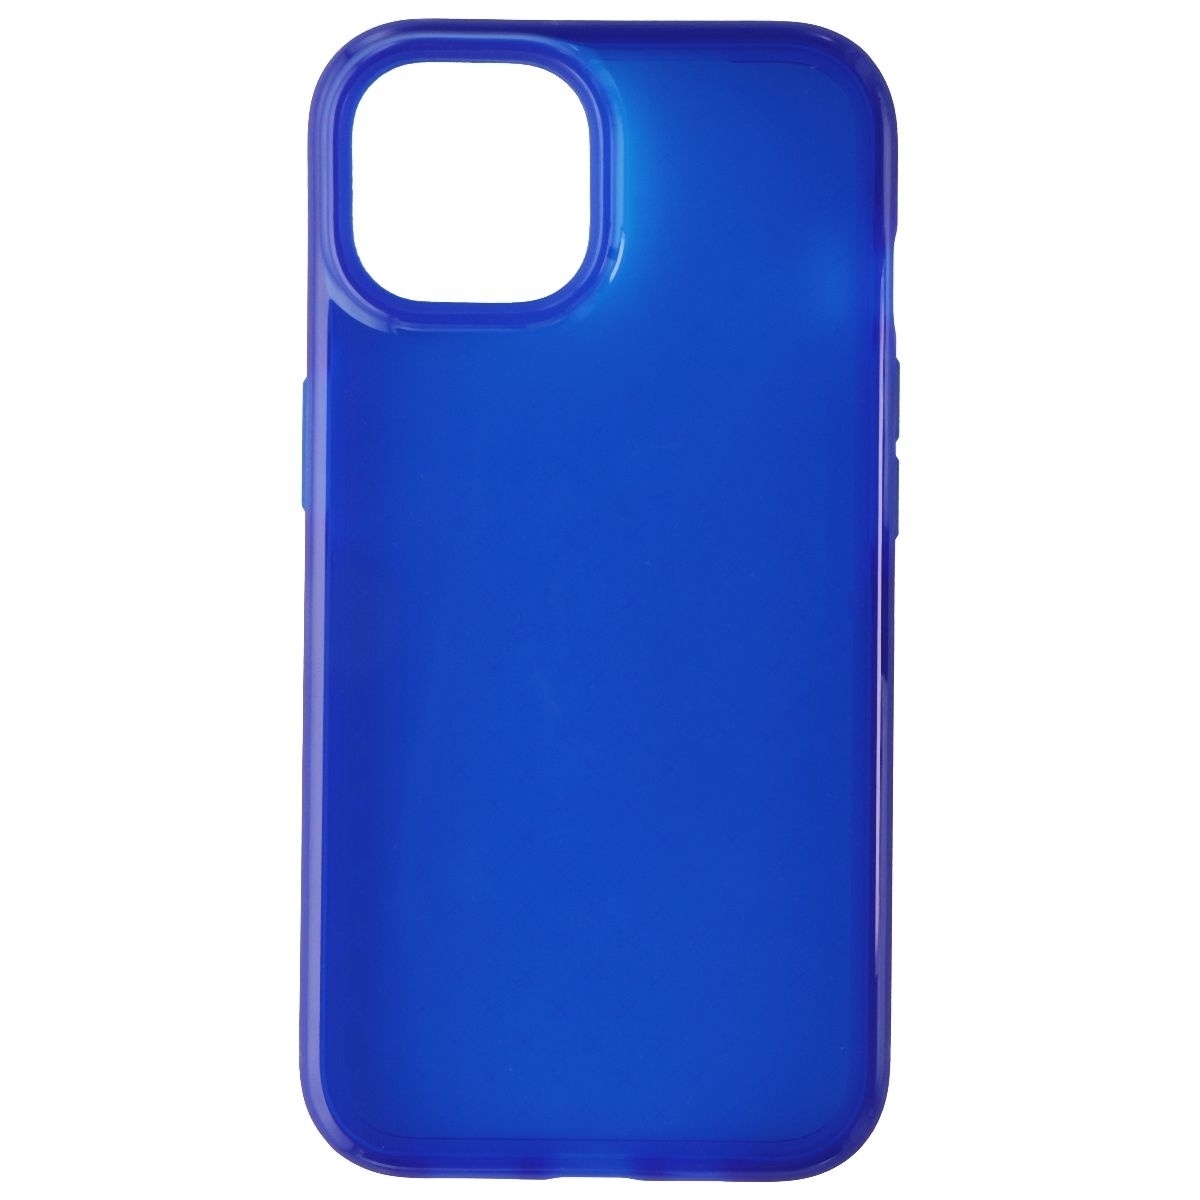 Tech21 Evo Check Series Flexible Gel Case For Apple IPhone 14 - Blue (Refurbished)